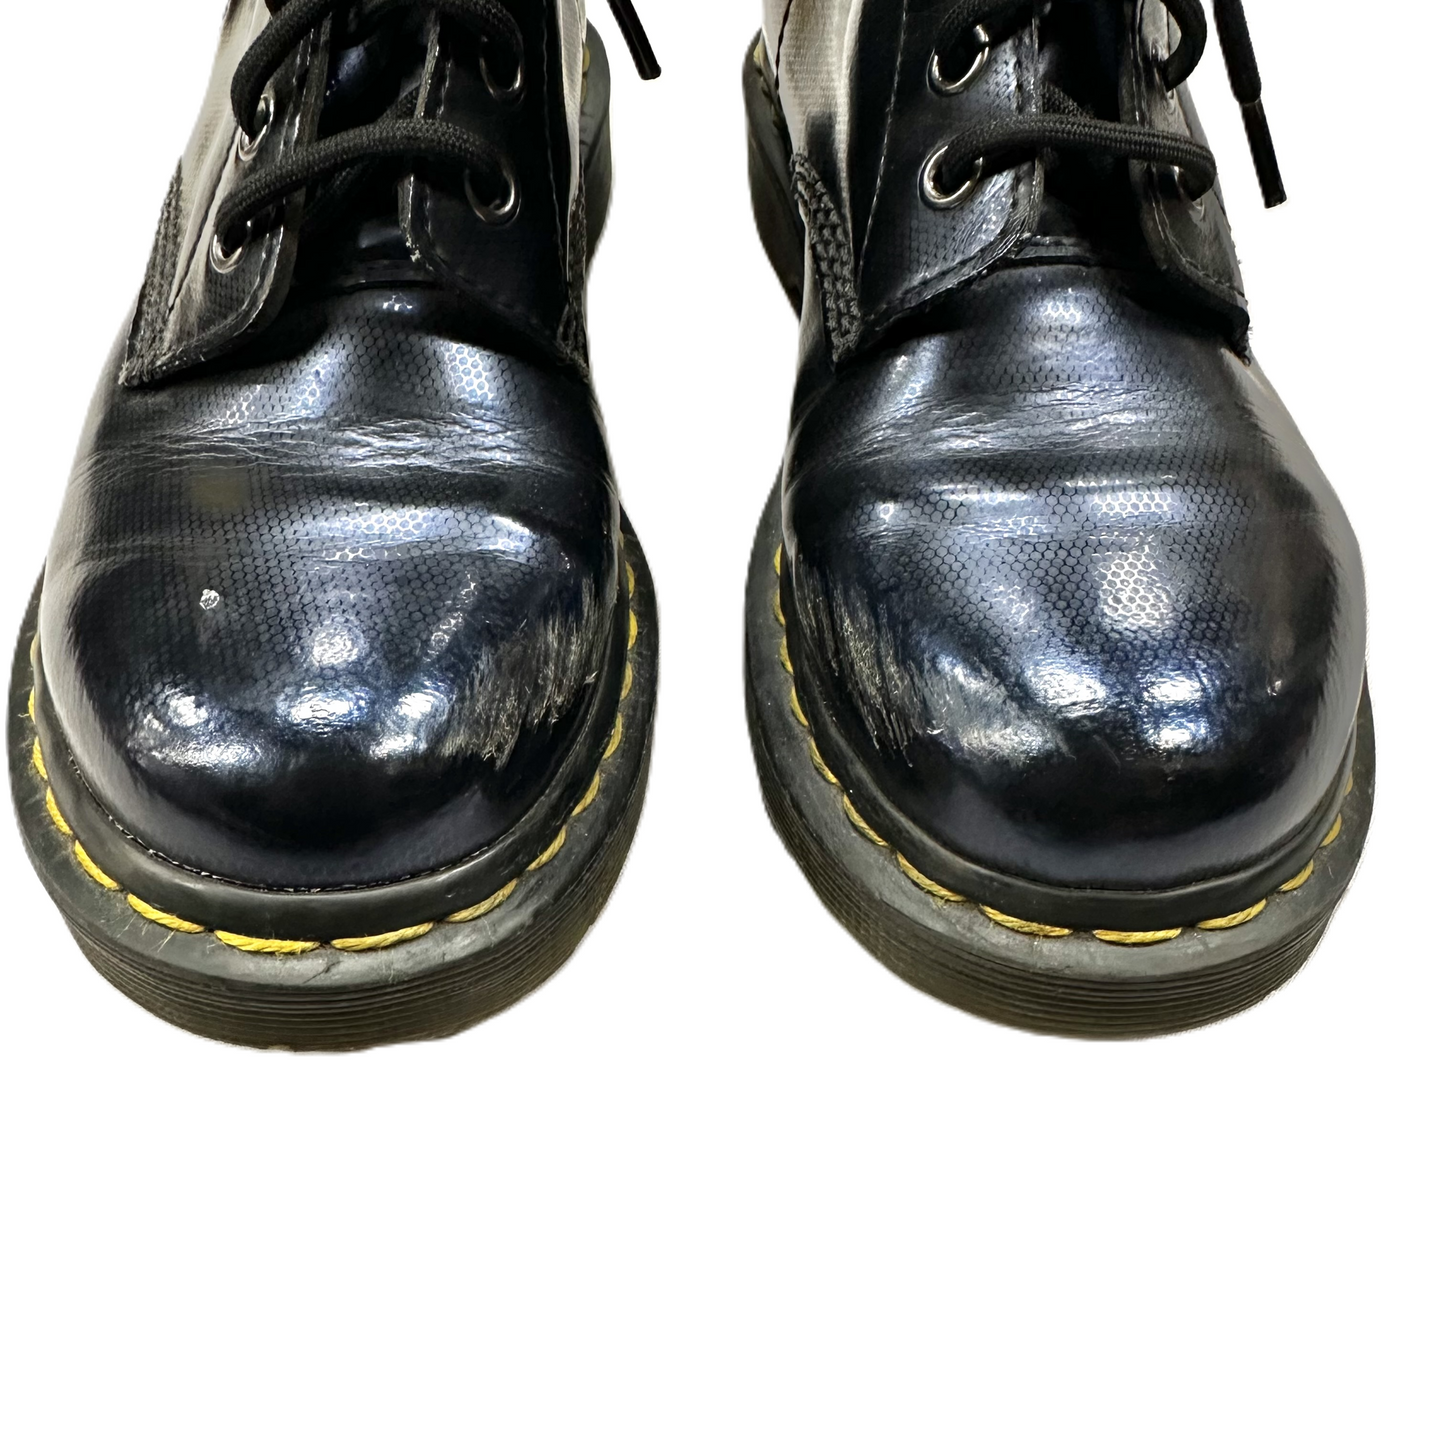 Blue Boots Mid-calf Flats By Dr Martens, Size: 6.5